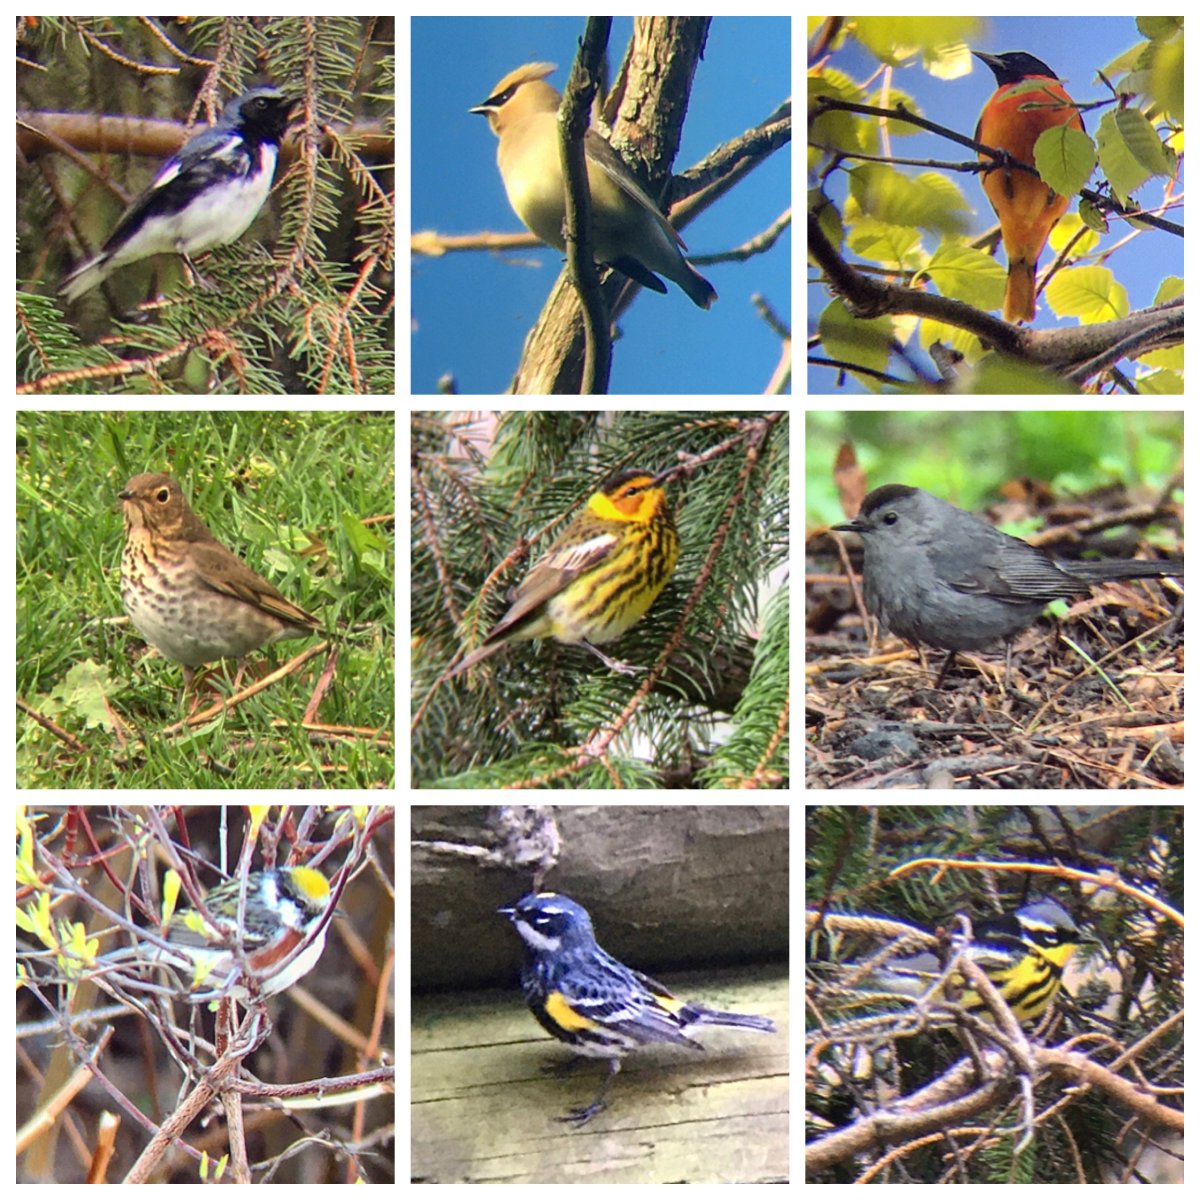 Ontario Place bird notes #29 | First Cedar Waxwings of the year! Also around this morning: Black-throated Blue Warbler, Baltimore Oriole, Swainson's Thrush, Cape May Warbler, Catbirds, Chestnut-sided Warbler, lots of Yellow-rumped Warblers, & a Magnolia Warbler  #TOBirdParty